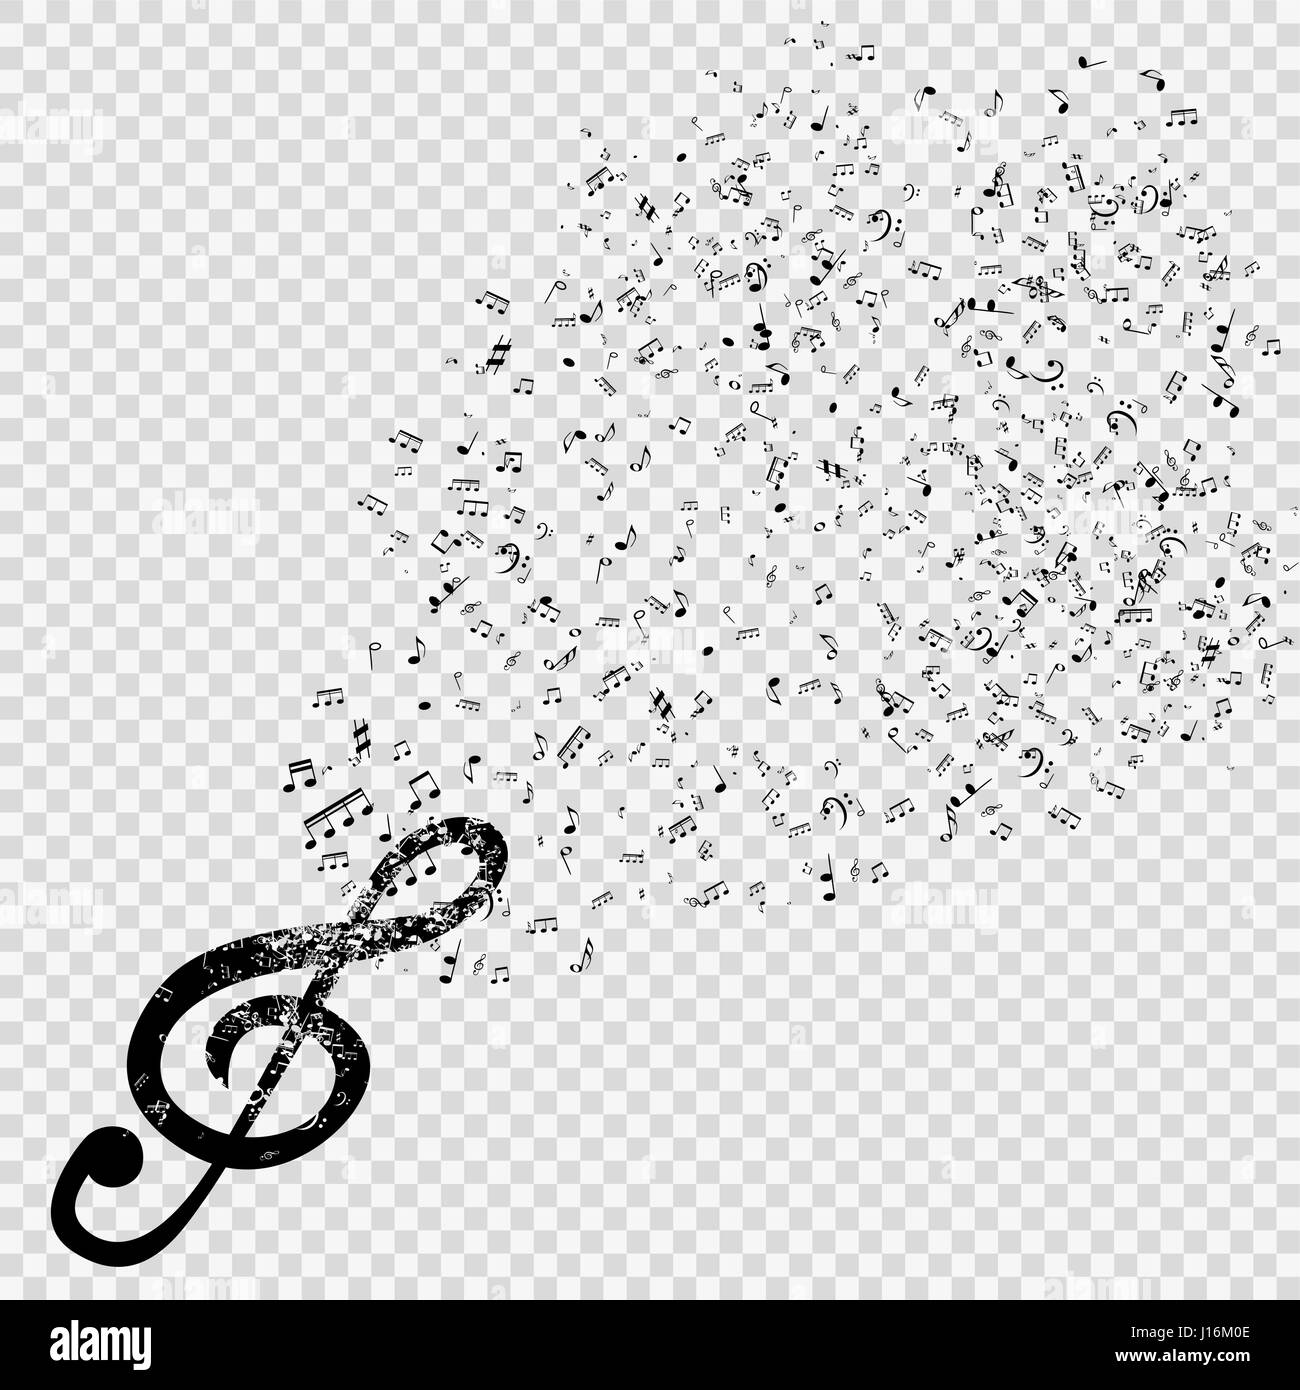 Set Of Musical Notes With Treble Clef On Transparent Background